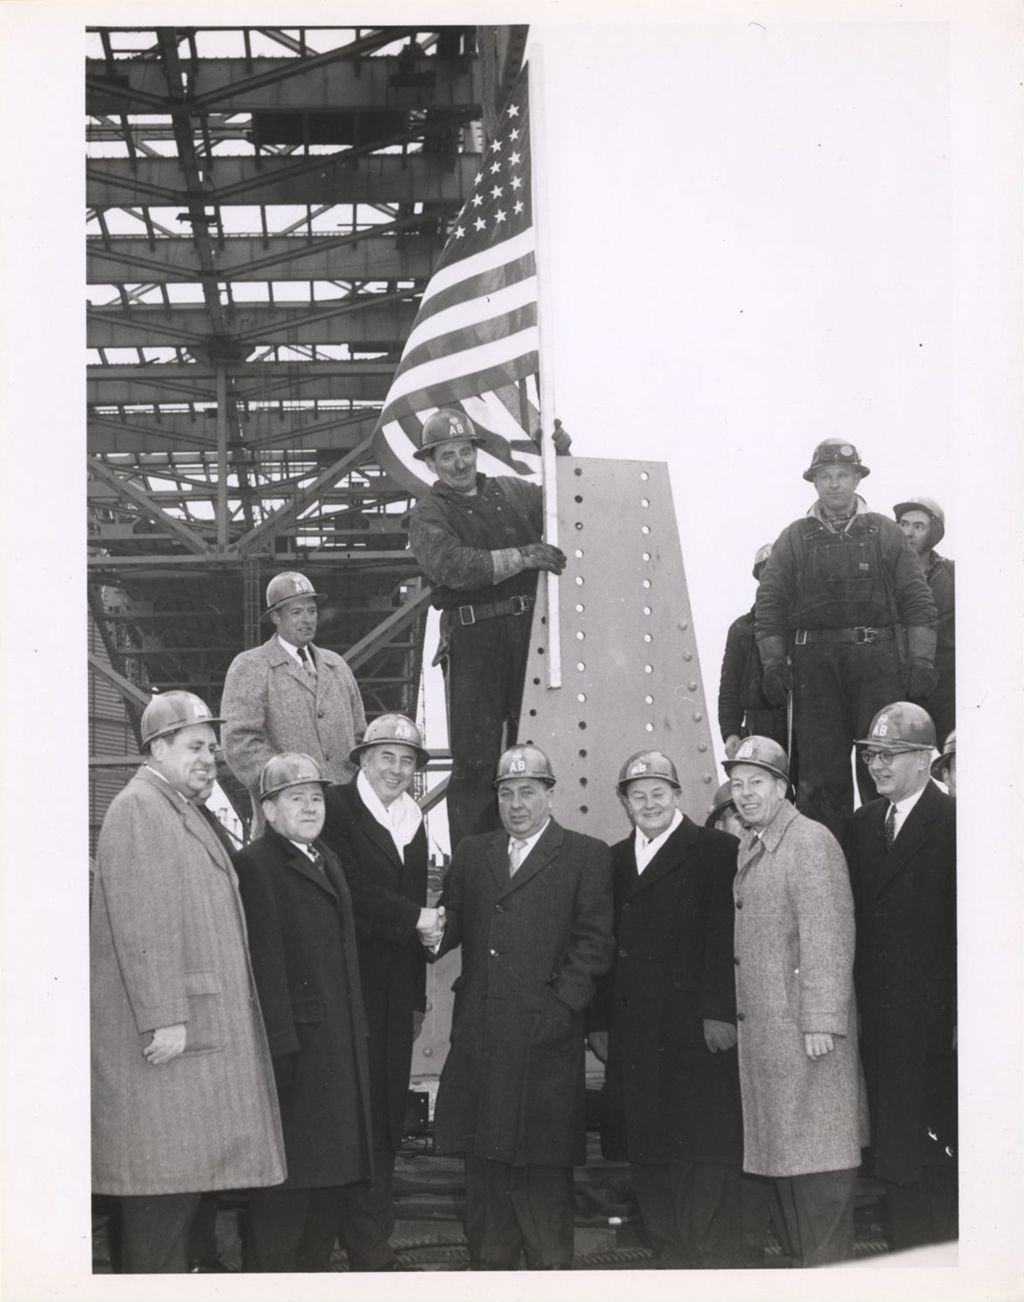 Miniature of Richard J. Daley and others at construction site